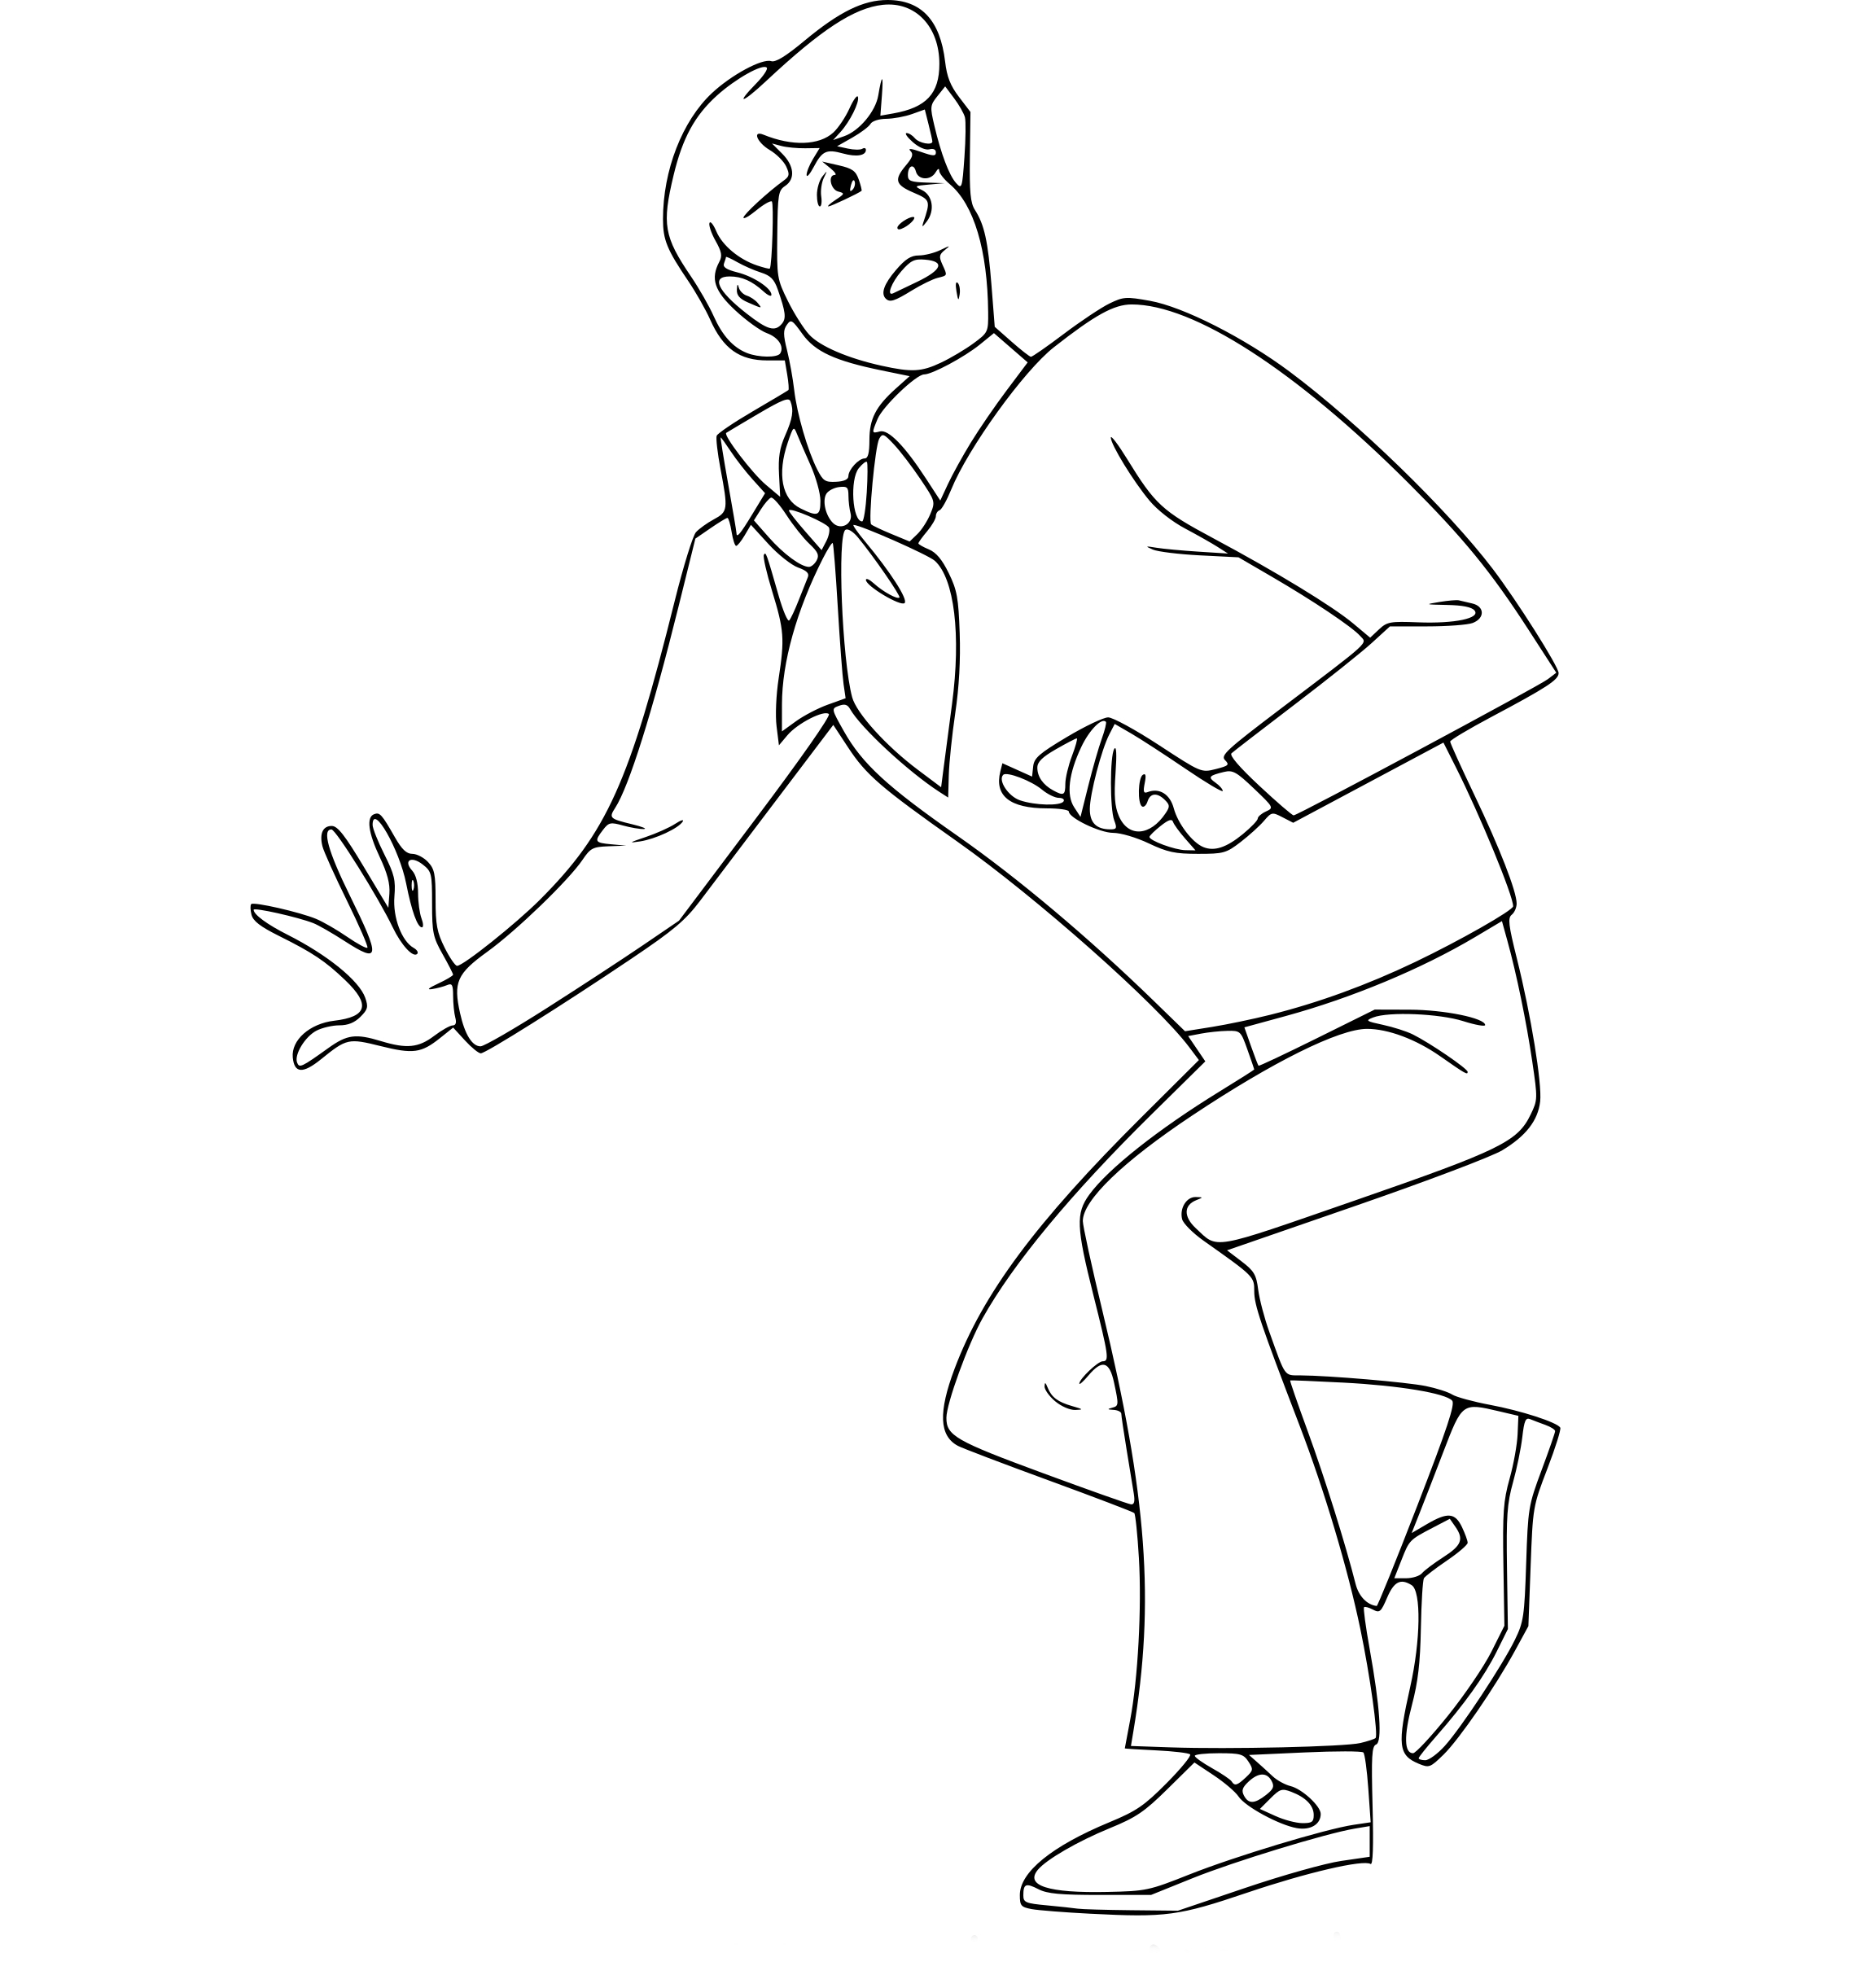 Fred Scooby Doo coloring page